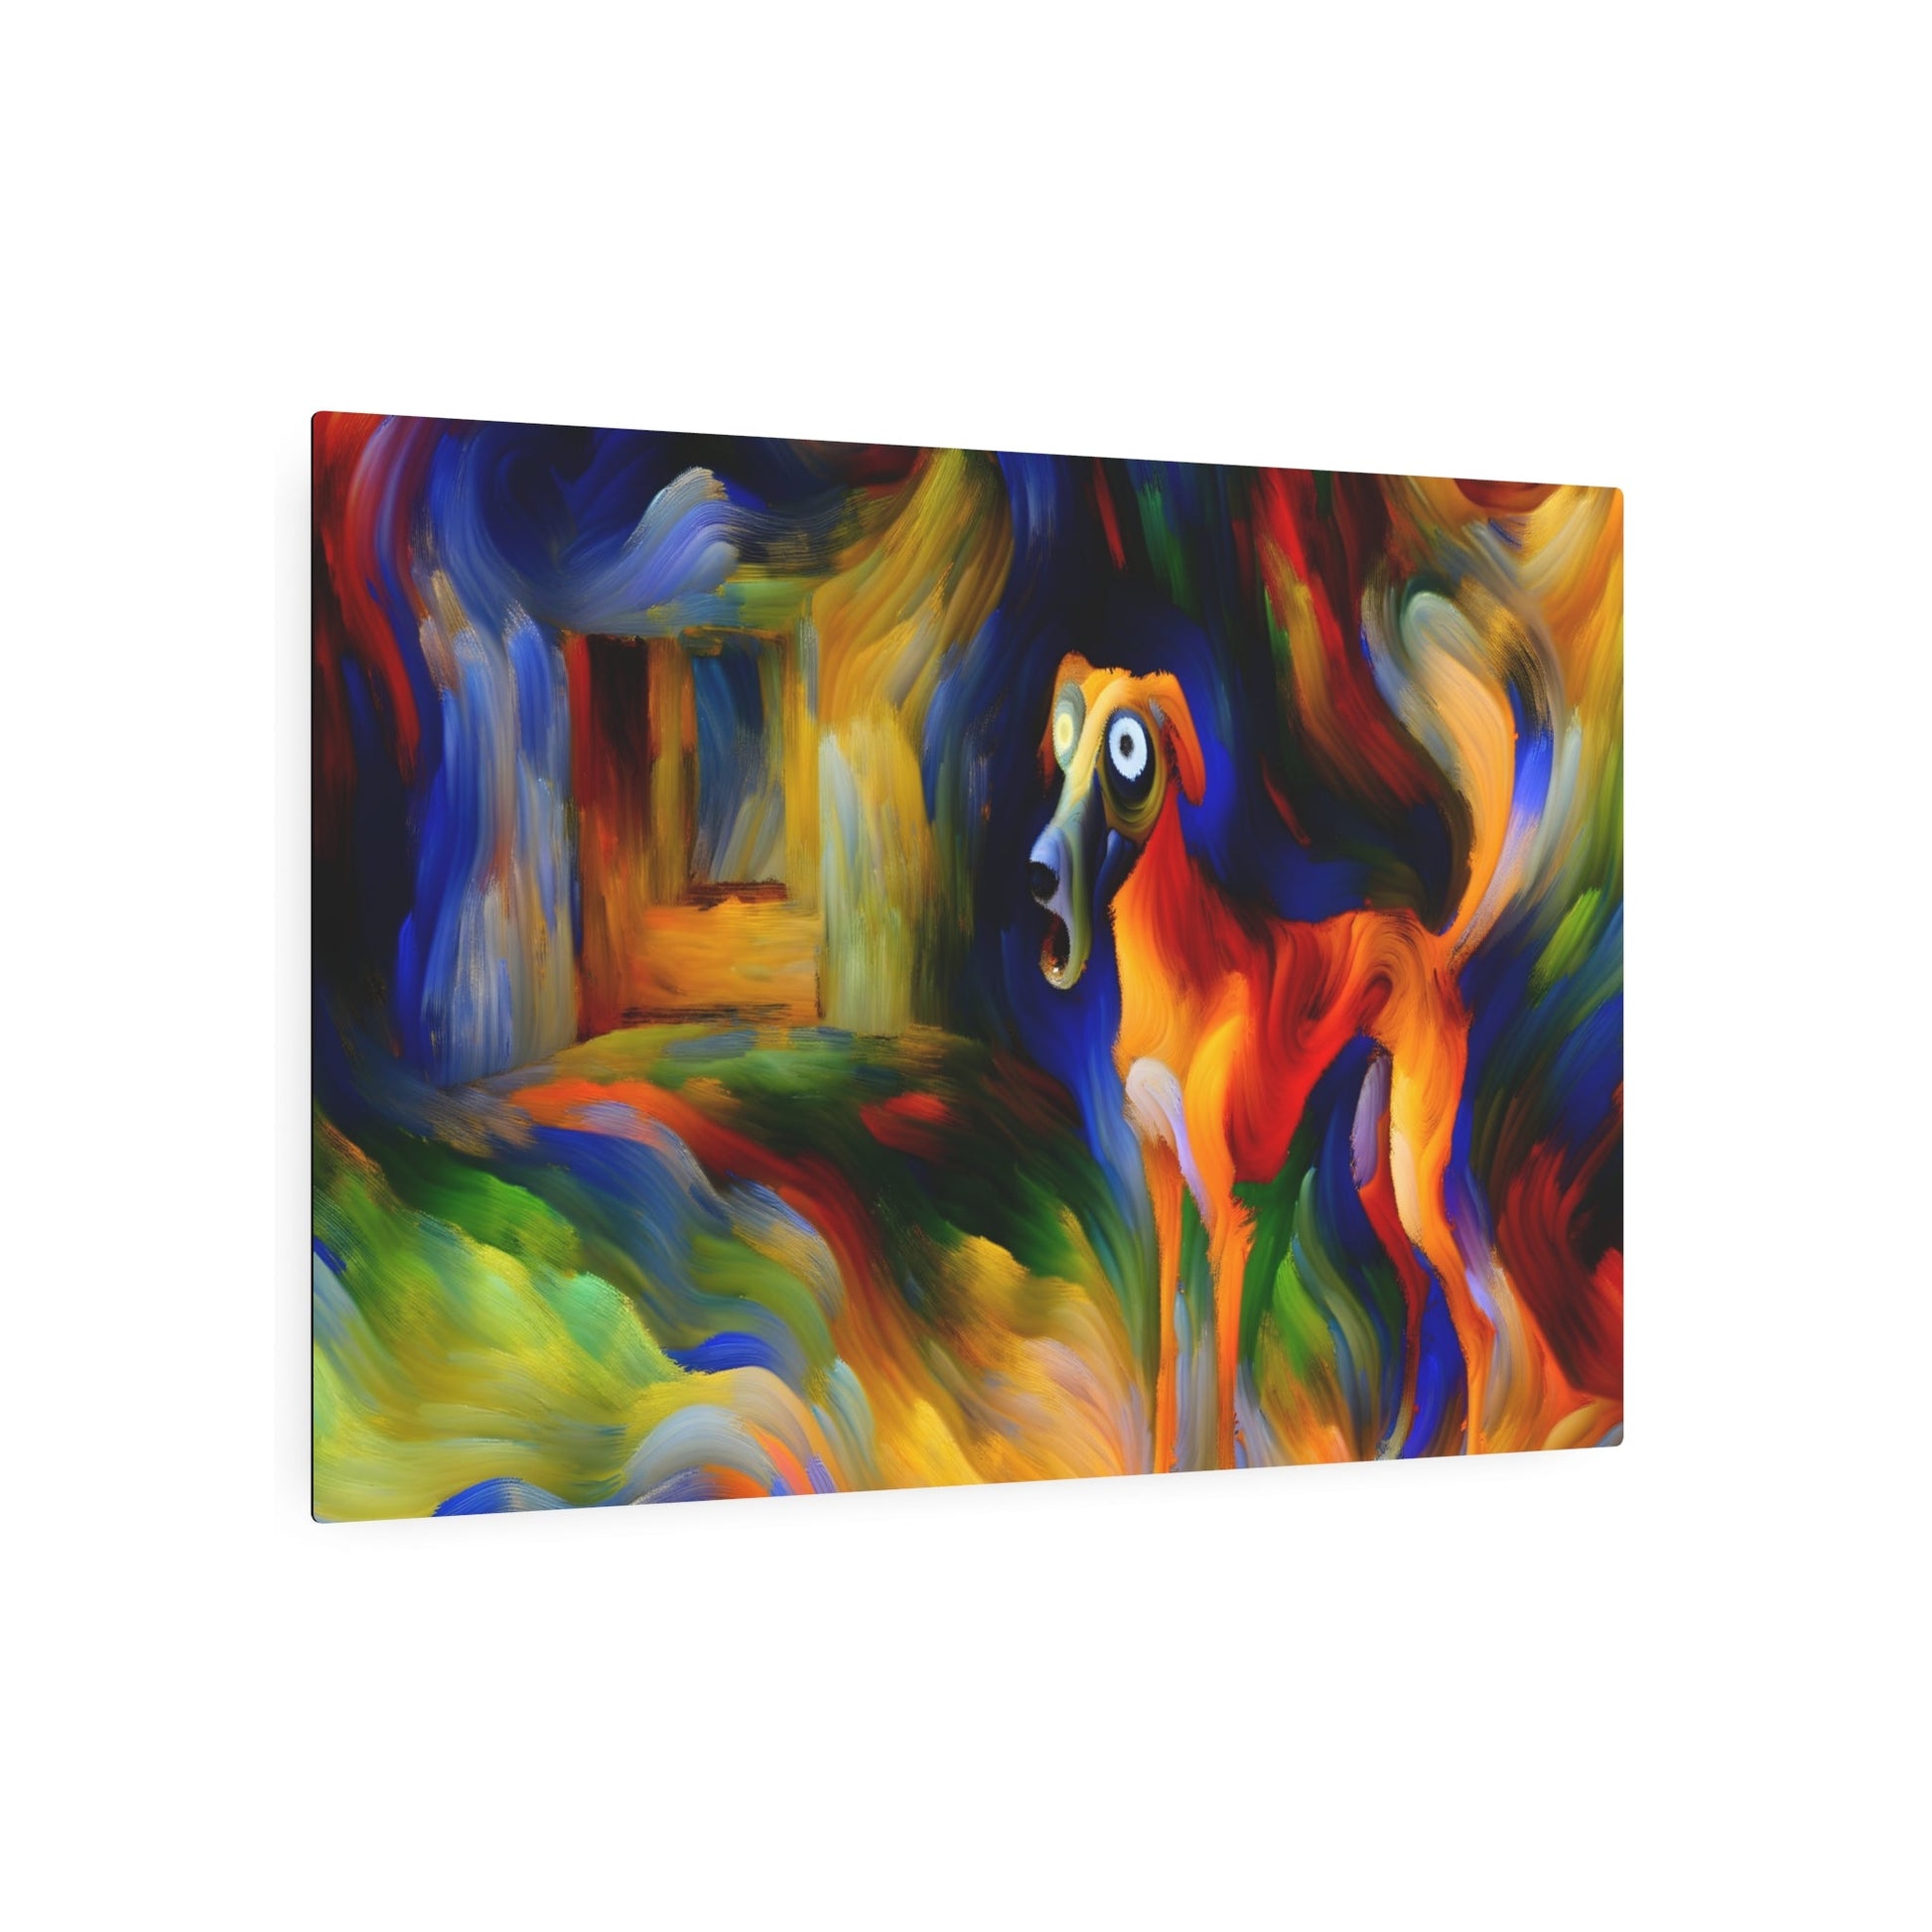 Metal Poster Art | "Expressionist Style Vivid and Emotional Dog Scene - Western Art Styles Expressionism Collection" - Metal Poster Art 36″ x 24″ (Horizontal) 0.12''